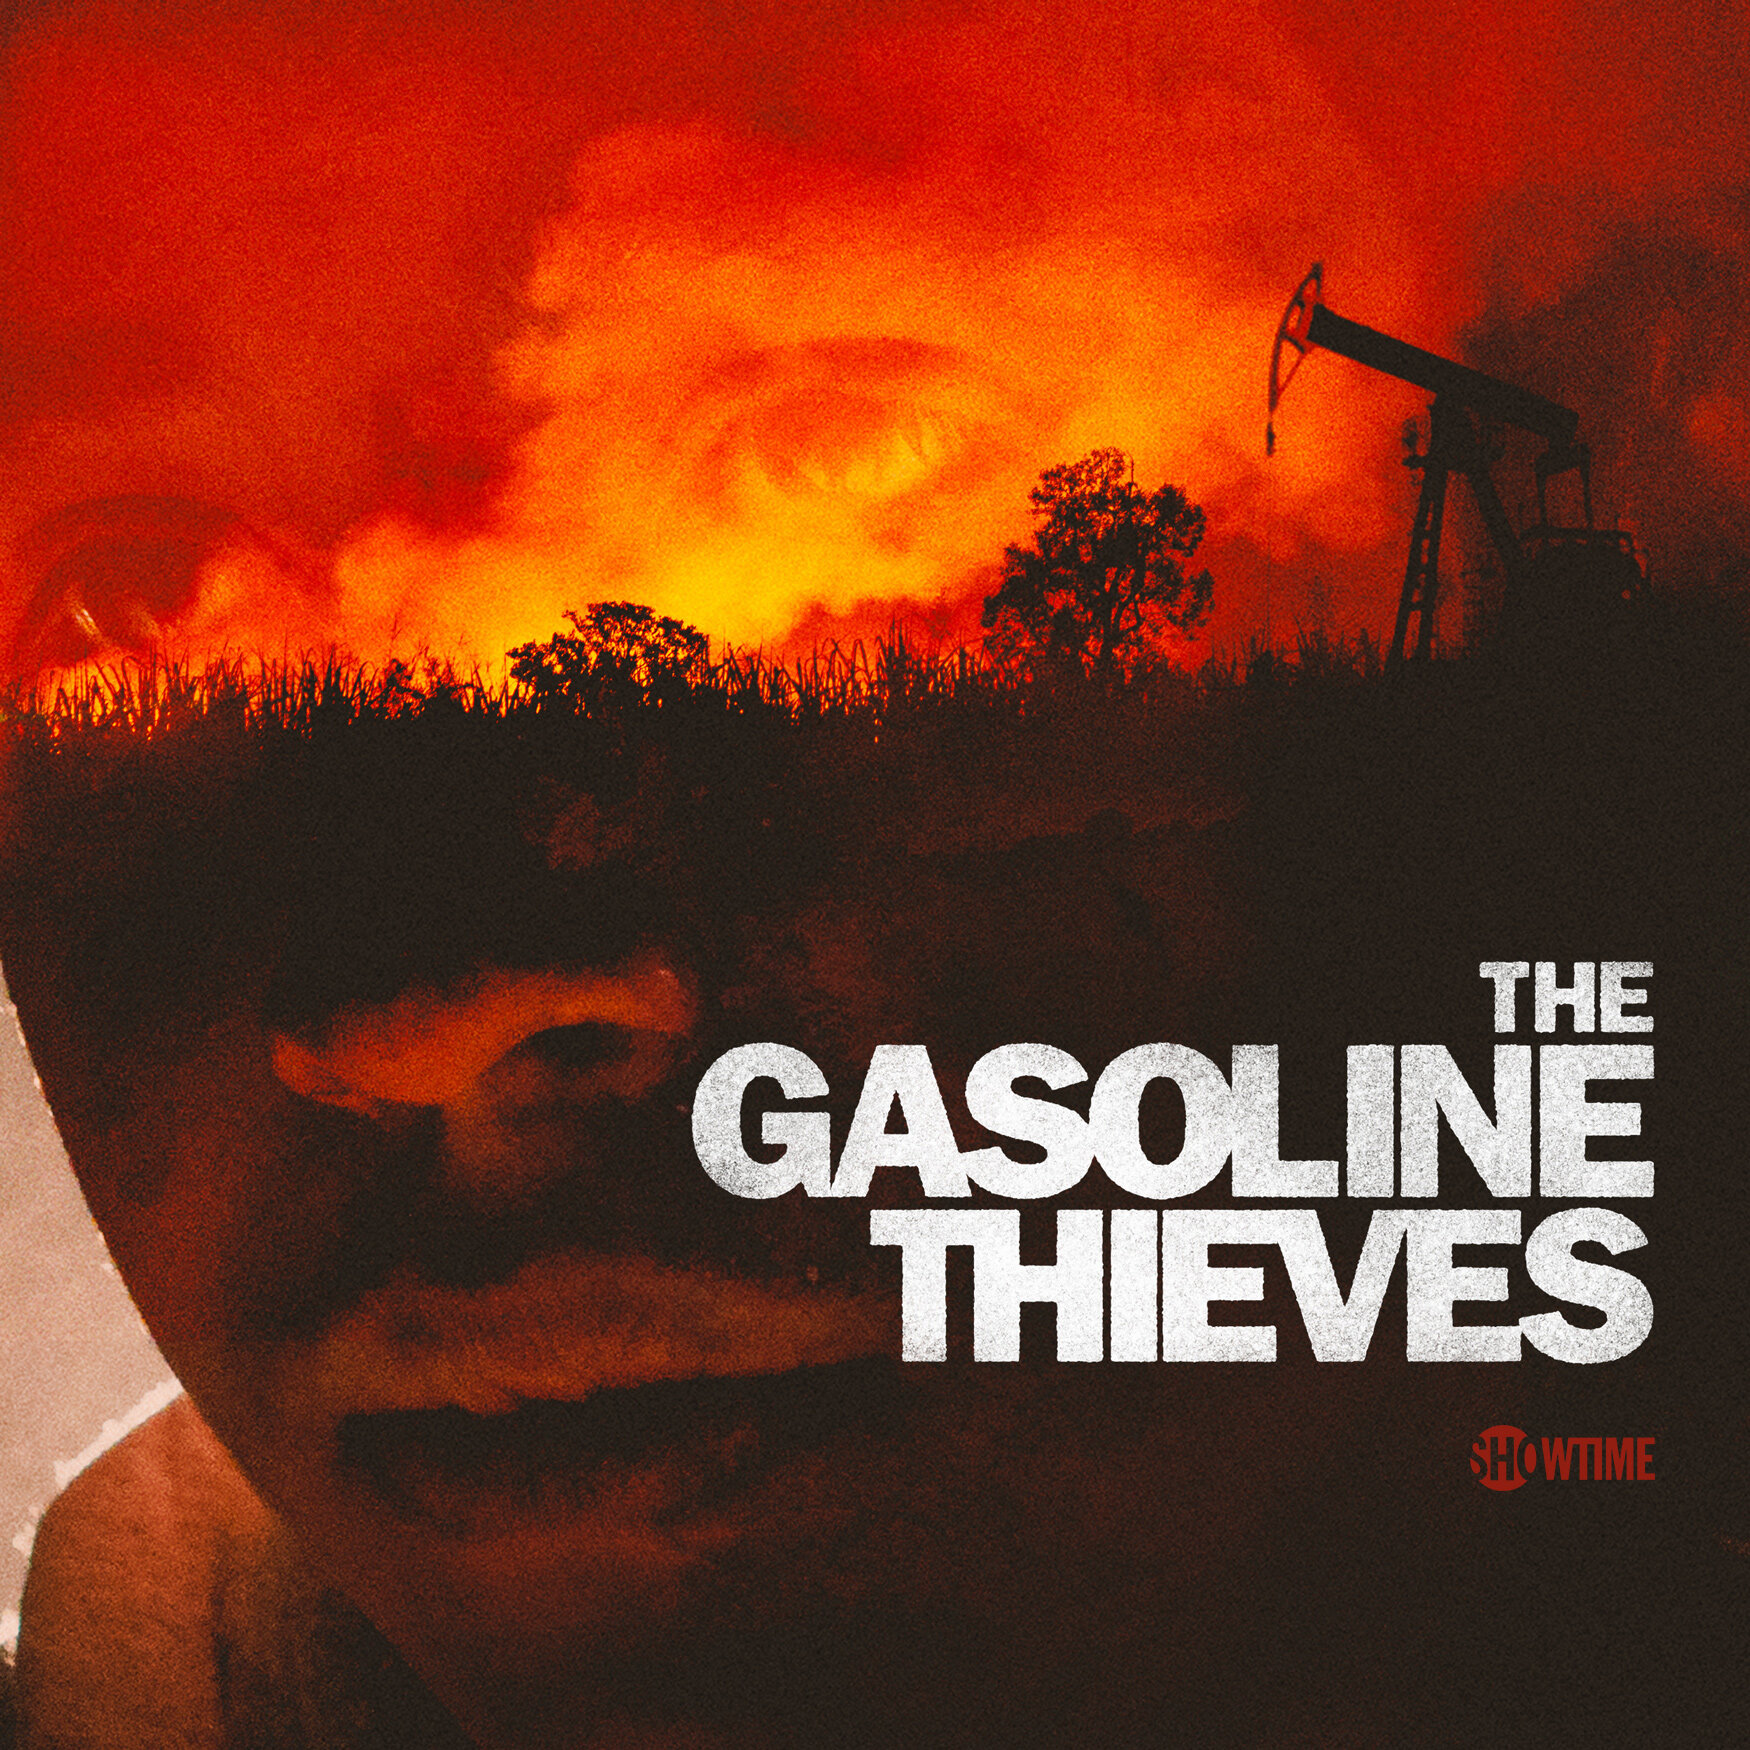 The Gasoline Thieves